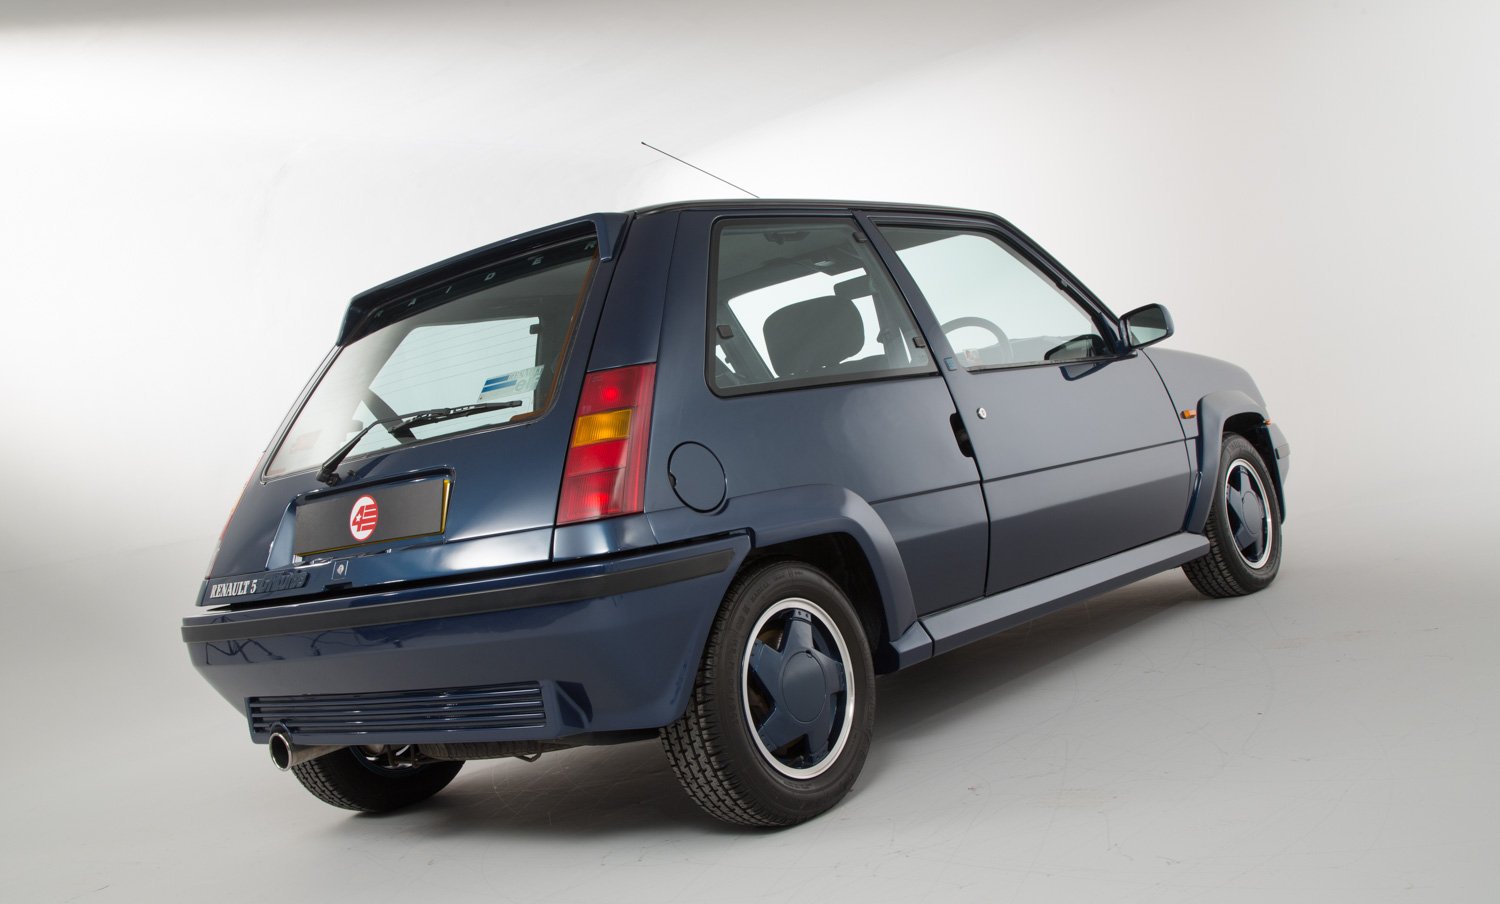 Renault 5 Gt Turbo Uk Spec 1986 Cars French Wallpapers Hd Desktop And Mobile Backgrounds